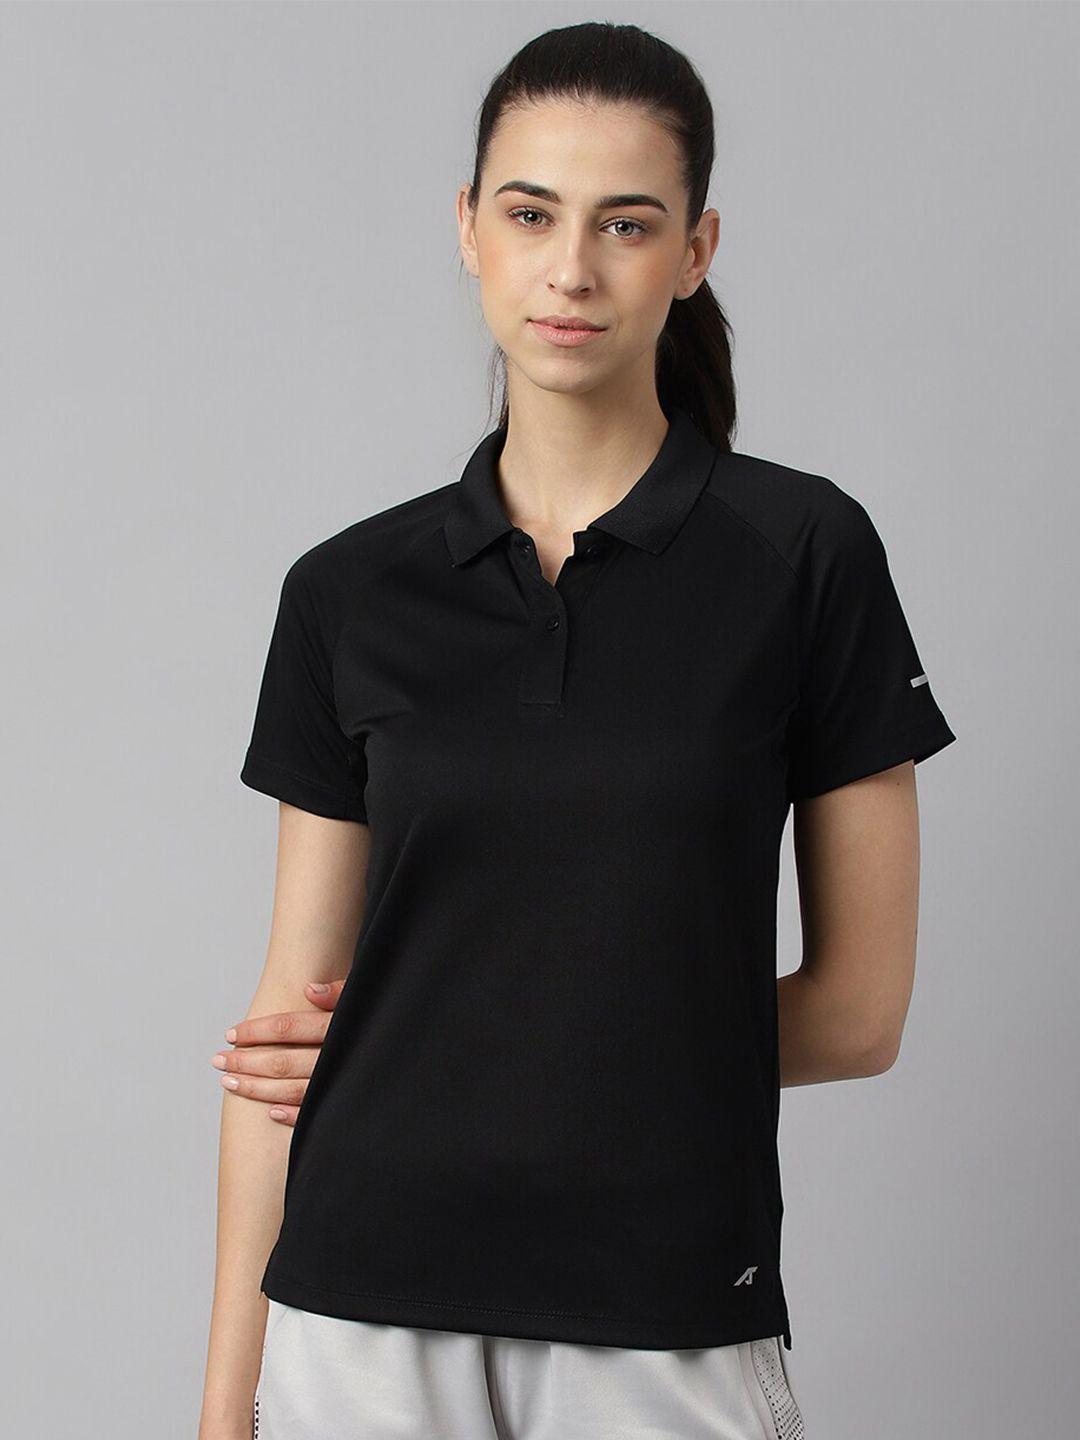 alcis women tech-fit anti-static soft-touch slim-fit training polo t-shirt